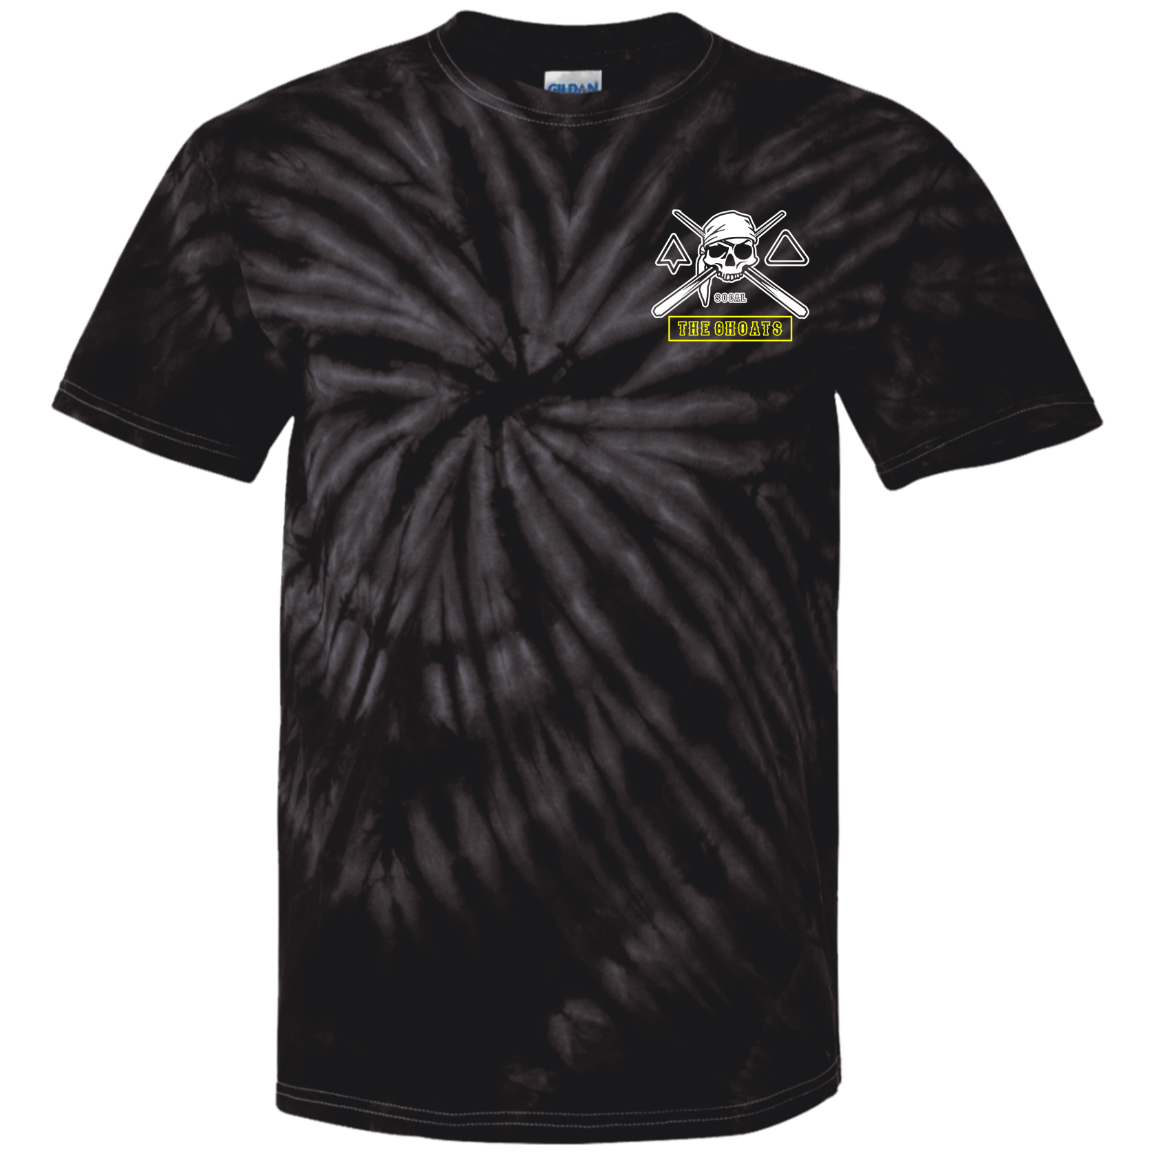 The GHOATS Custom Design. #4 Motorcycle Club Style. Ver 1/2. Youth Tie Dye T-Shirt